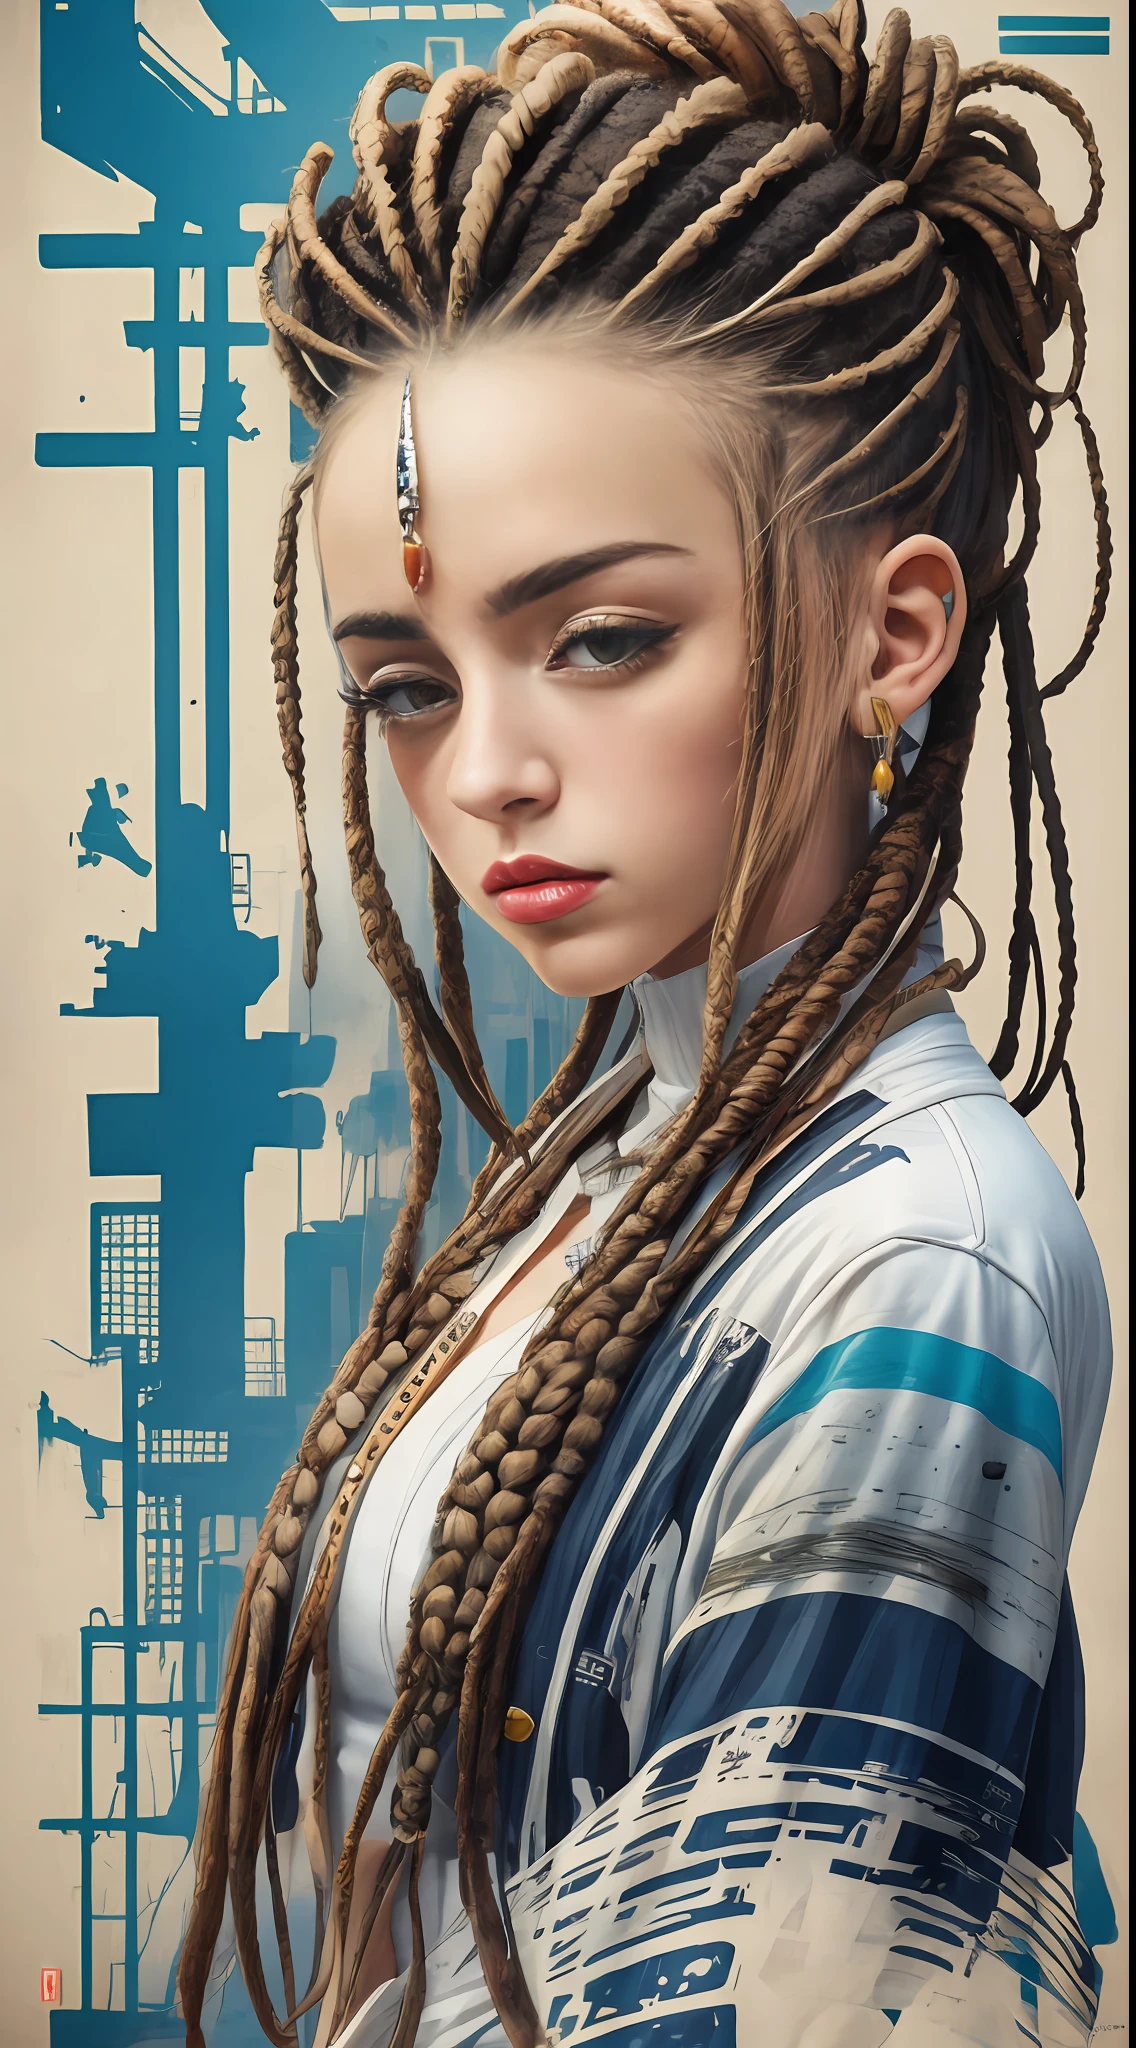 Masterpiece of an incredible albino girl, so white, with biodread hair,  largos dreadlocks, Modern clothing, baggy, totally white with black stripes, Served, Detailed and realistic image, Amazing composition with vintage scenery with abstract shapes, Abstract minimalist background with elven rune symbols, melt, Drip, Yoshitomo Nara:1.5, Wes Anderson:1.3, New casualism, retro, minimalism,BioPunkAI, epic quality, epic resolution, with DreamShaper art style.